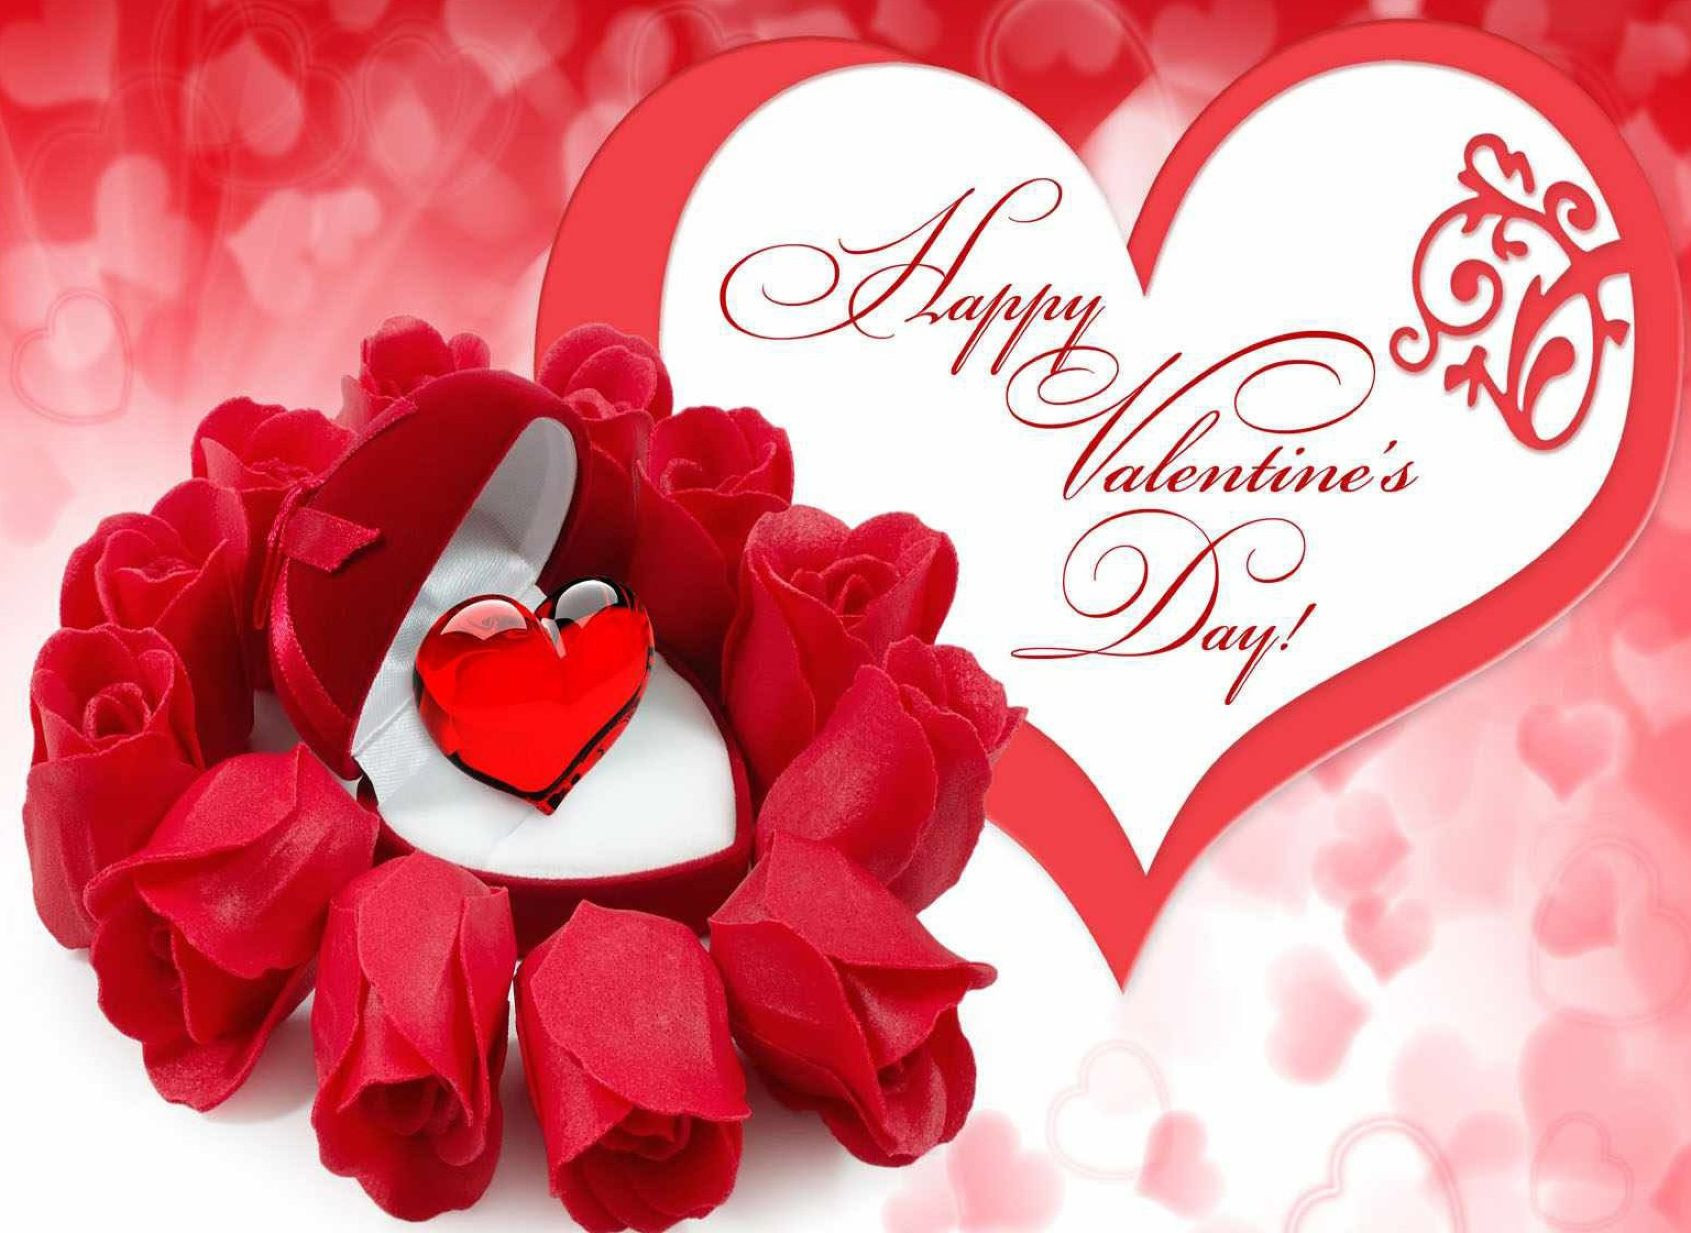 Valentines Day Pic And Quotes
 Happy Valentines Day Quotes Wallpaper Desktop HD